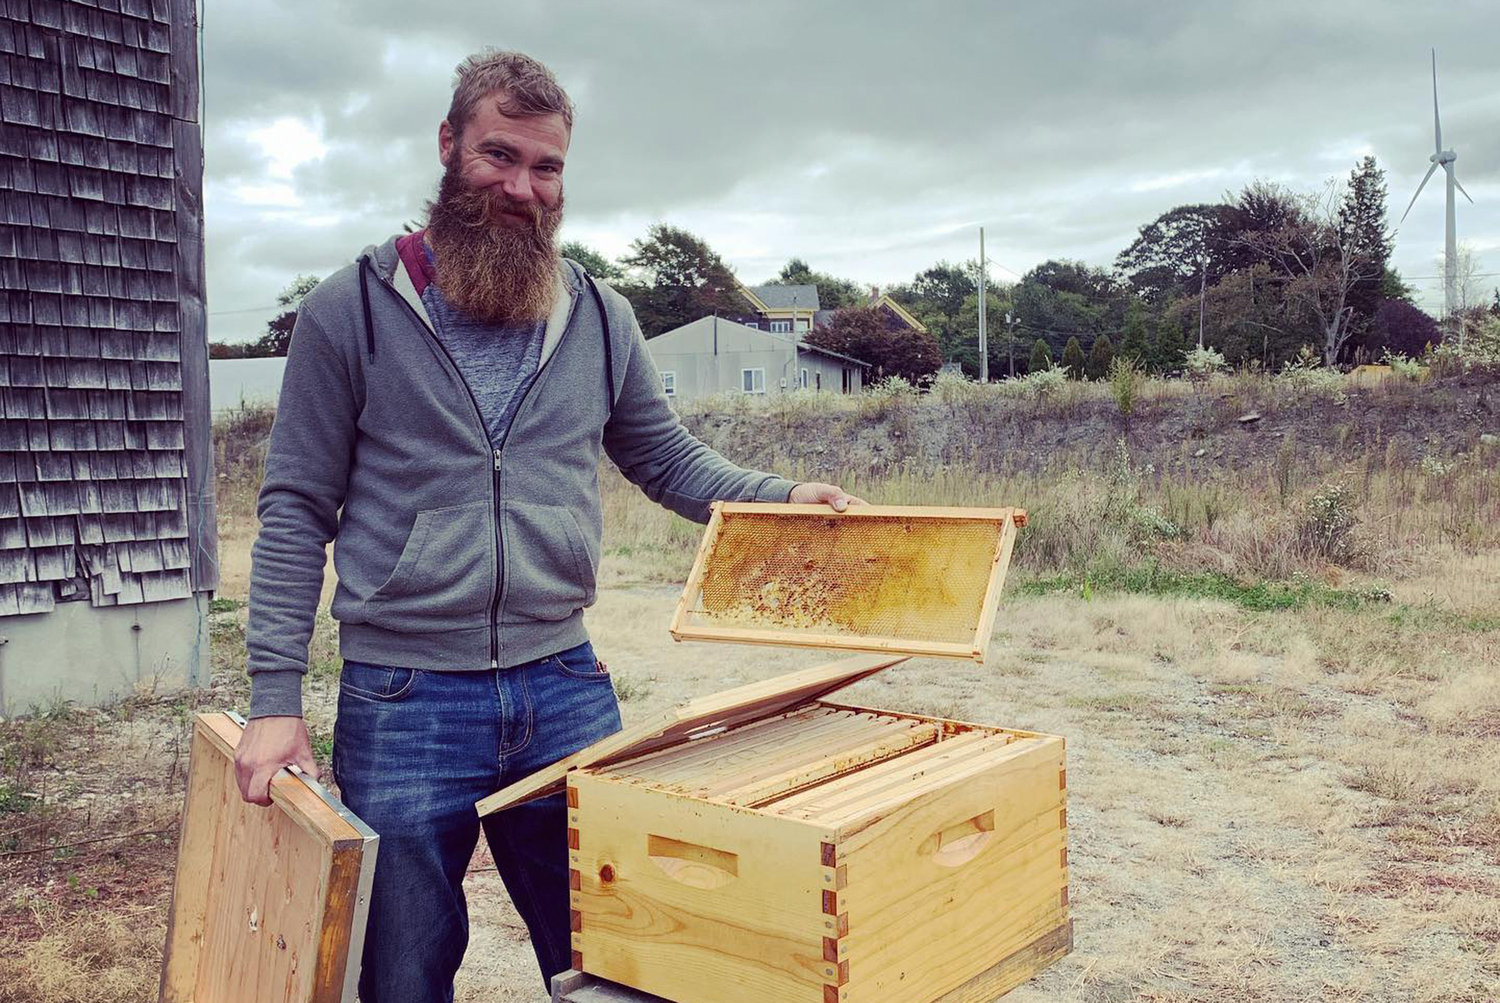 Collecting honey for craft beer flavors